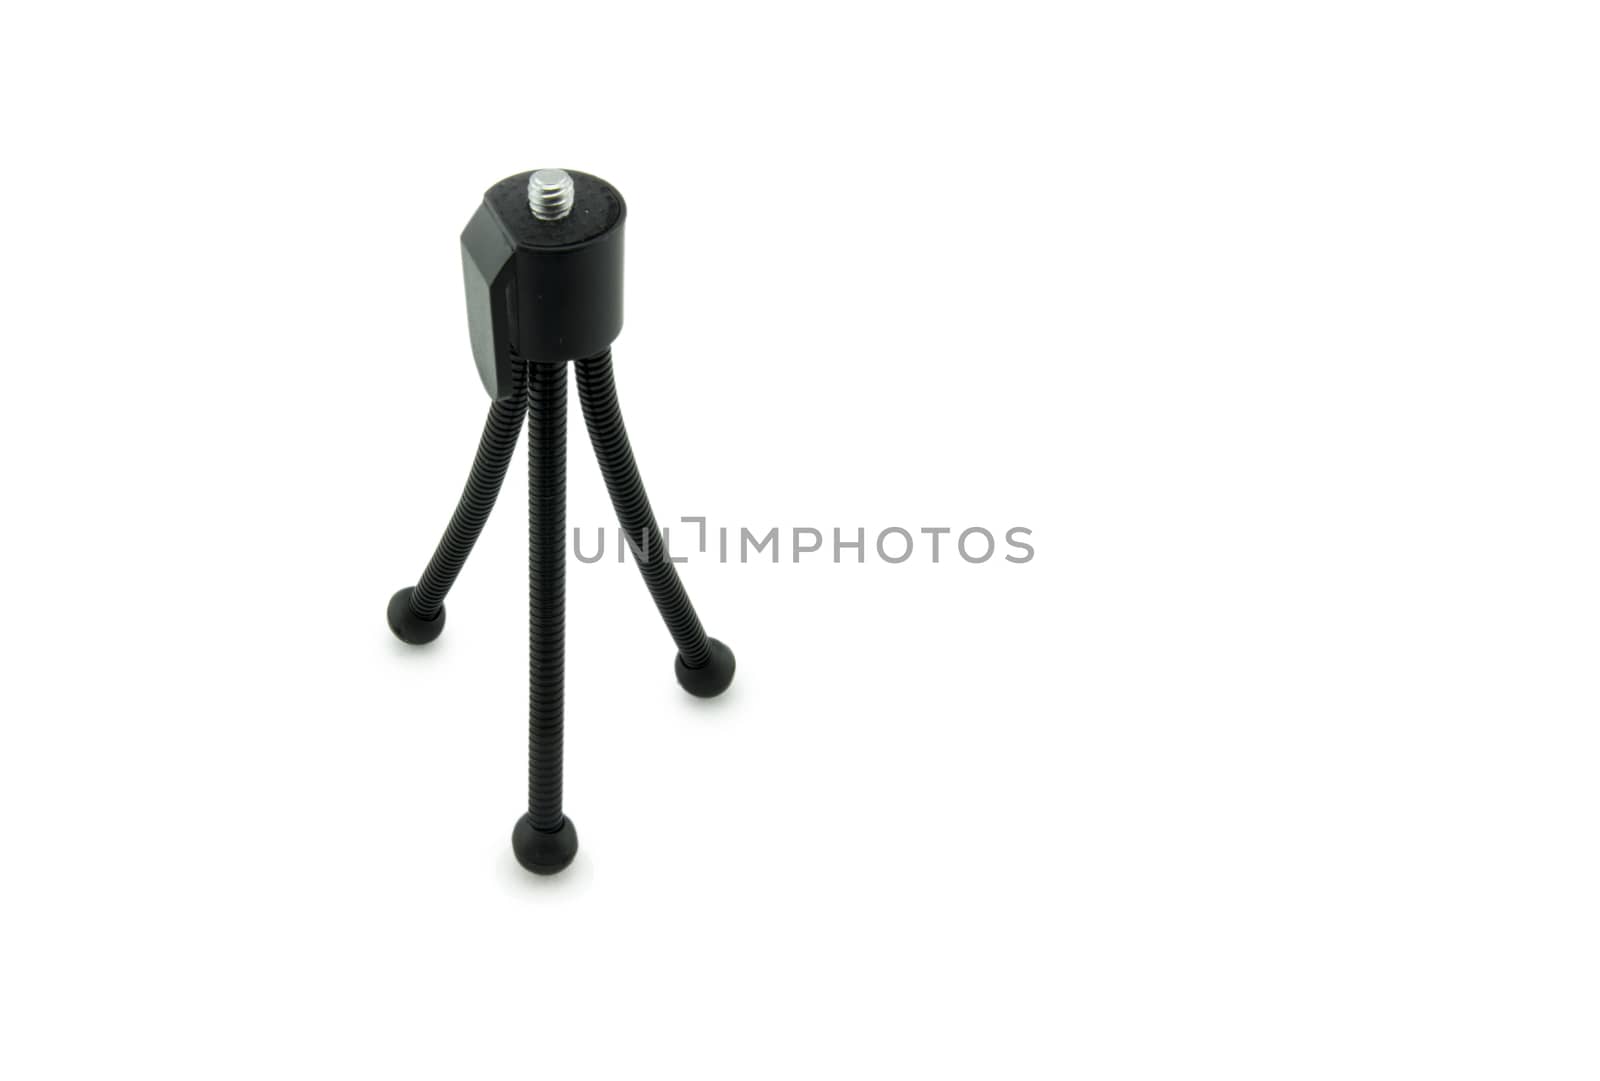 mini tripod at white background. For your commercial and editorial use.